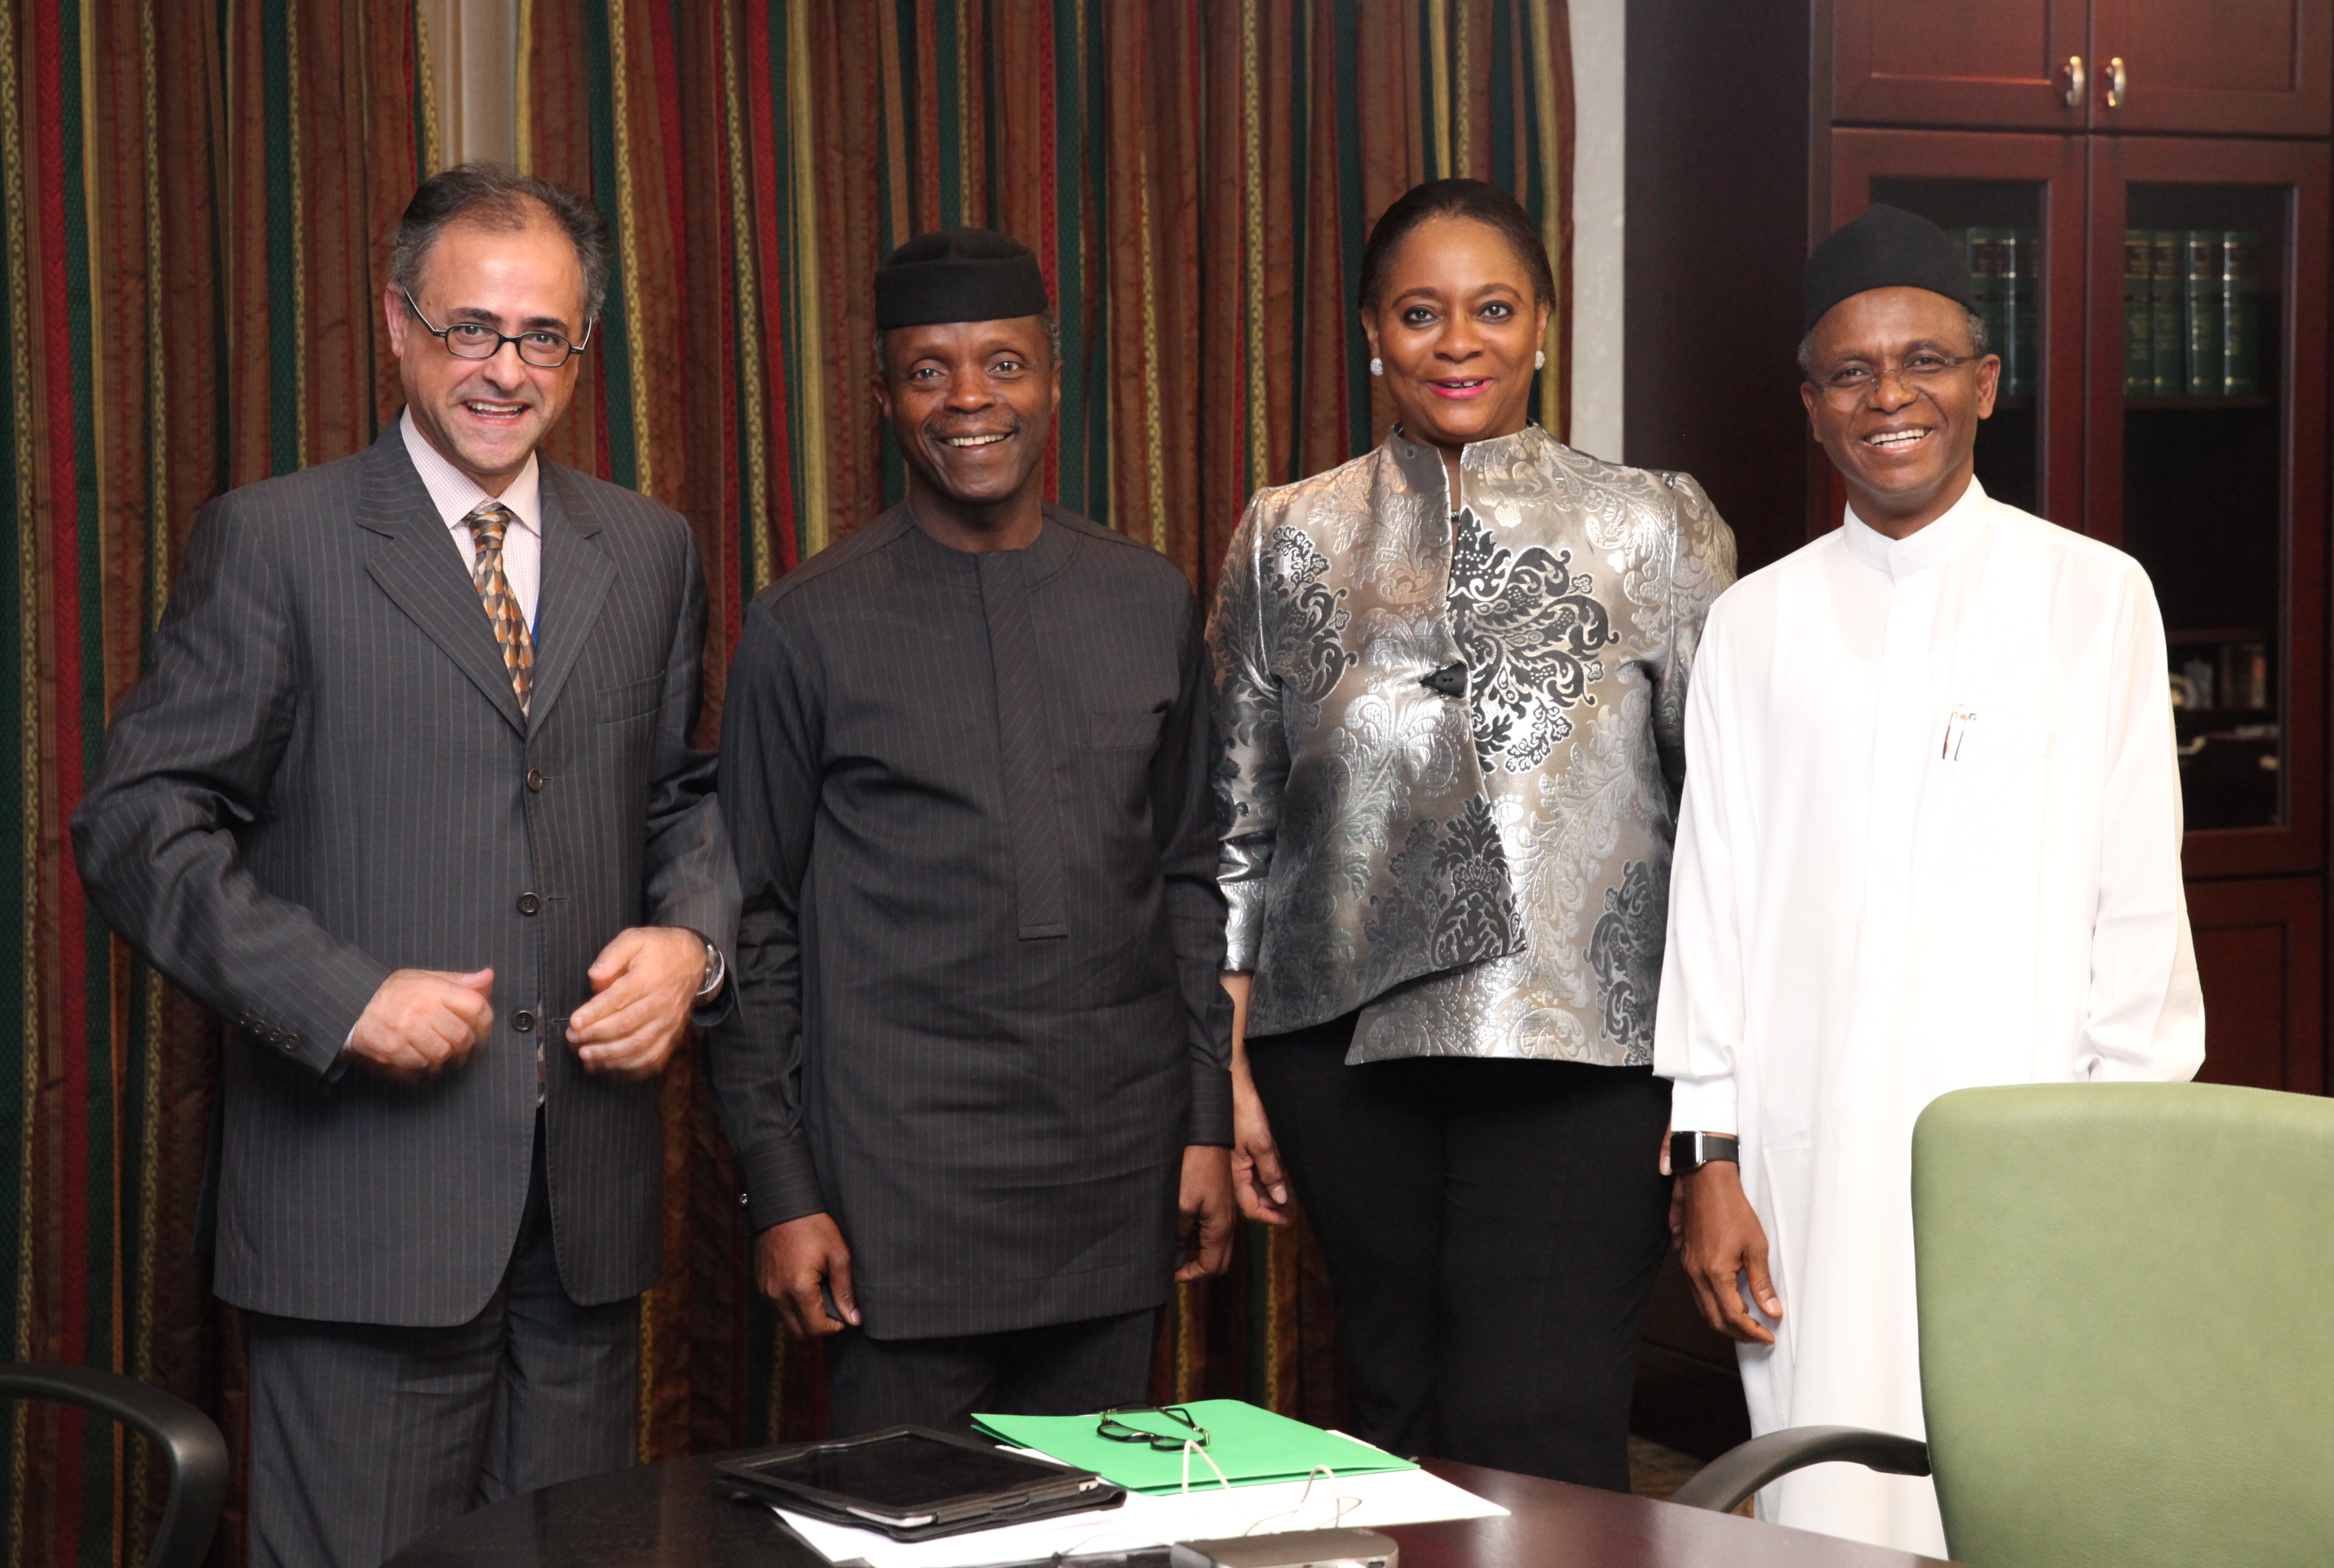 VP Osinbajo Meets With Arunma Oteh And The Treasurer Of World Bank On 04/12/2015